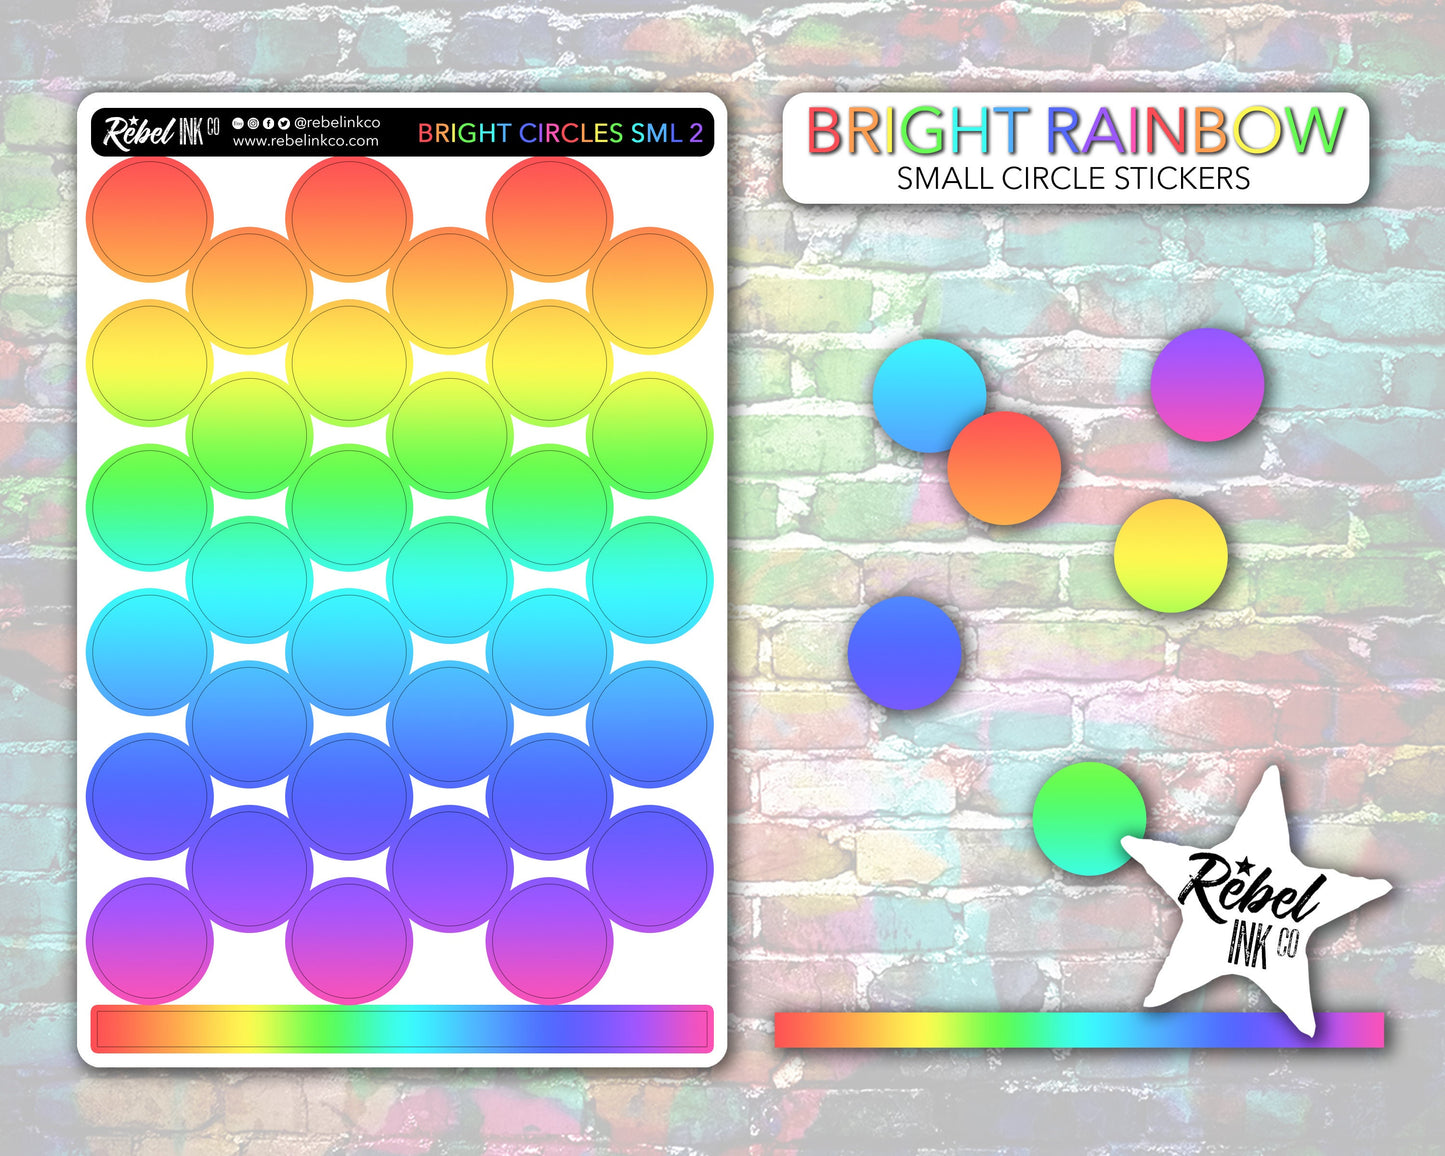 Solid Circle Stickers - Small - Bright Rainbow